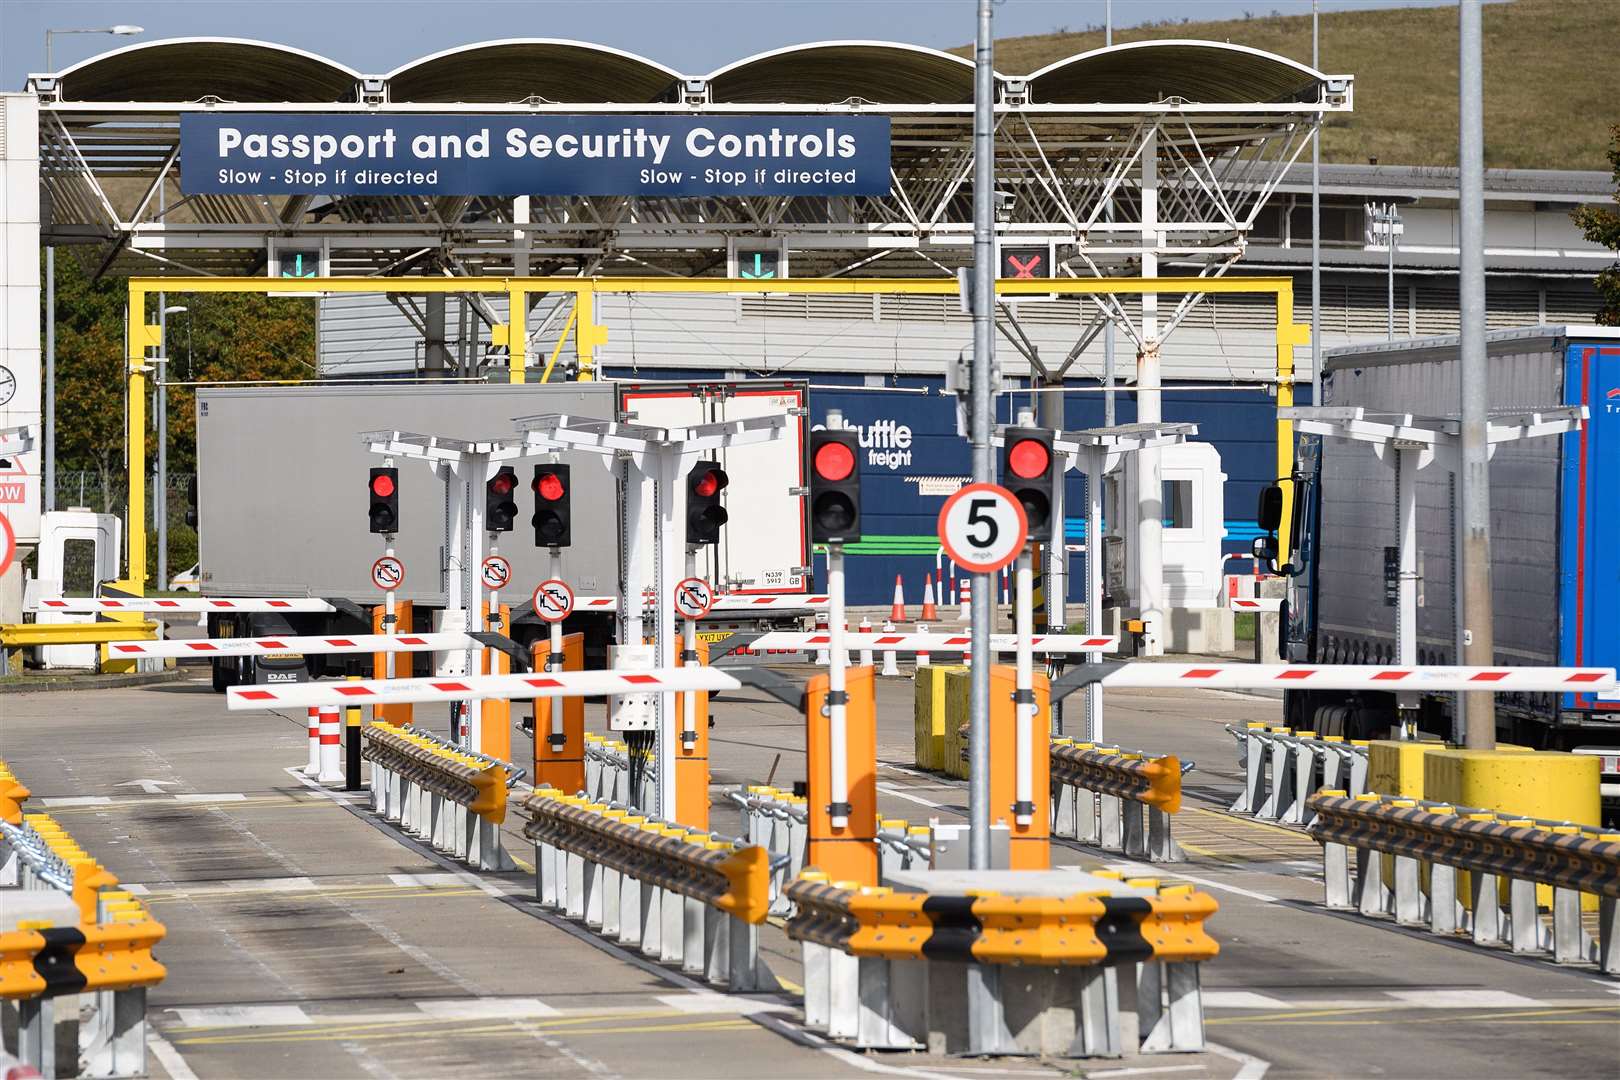 SUPPORT MEASURES: The UK Government announced a £705 million funding package for border infrastructure, staffing and IT. (42533290)